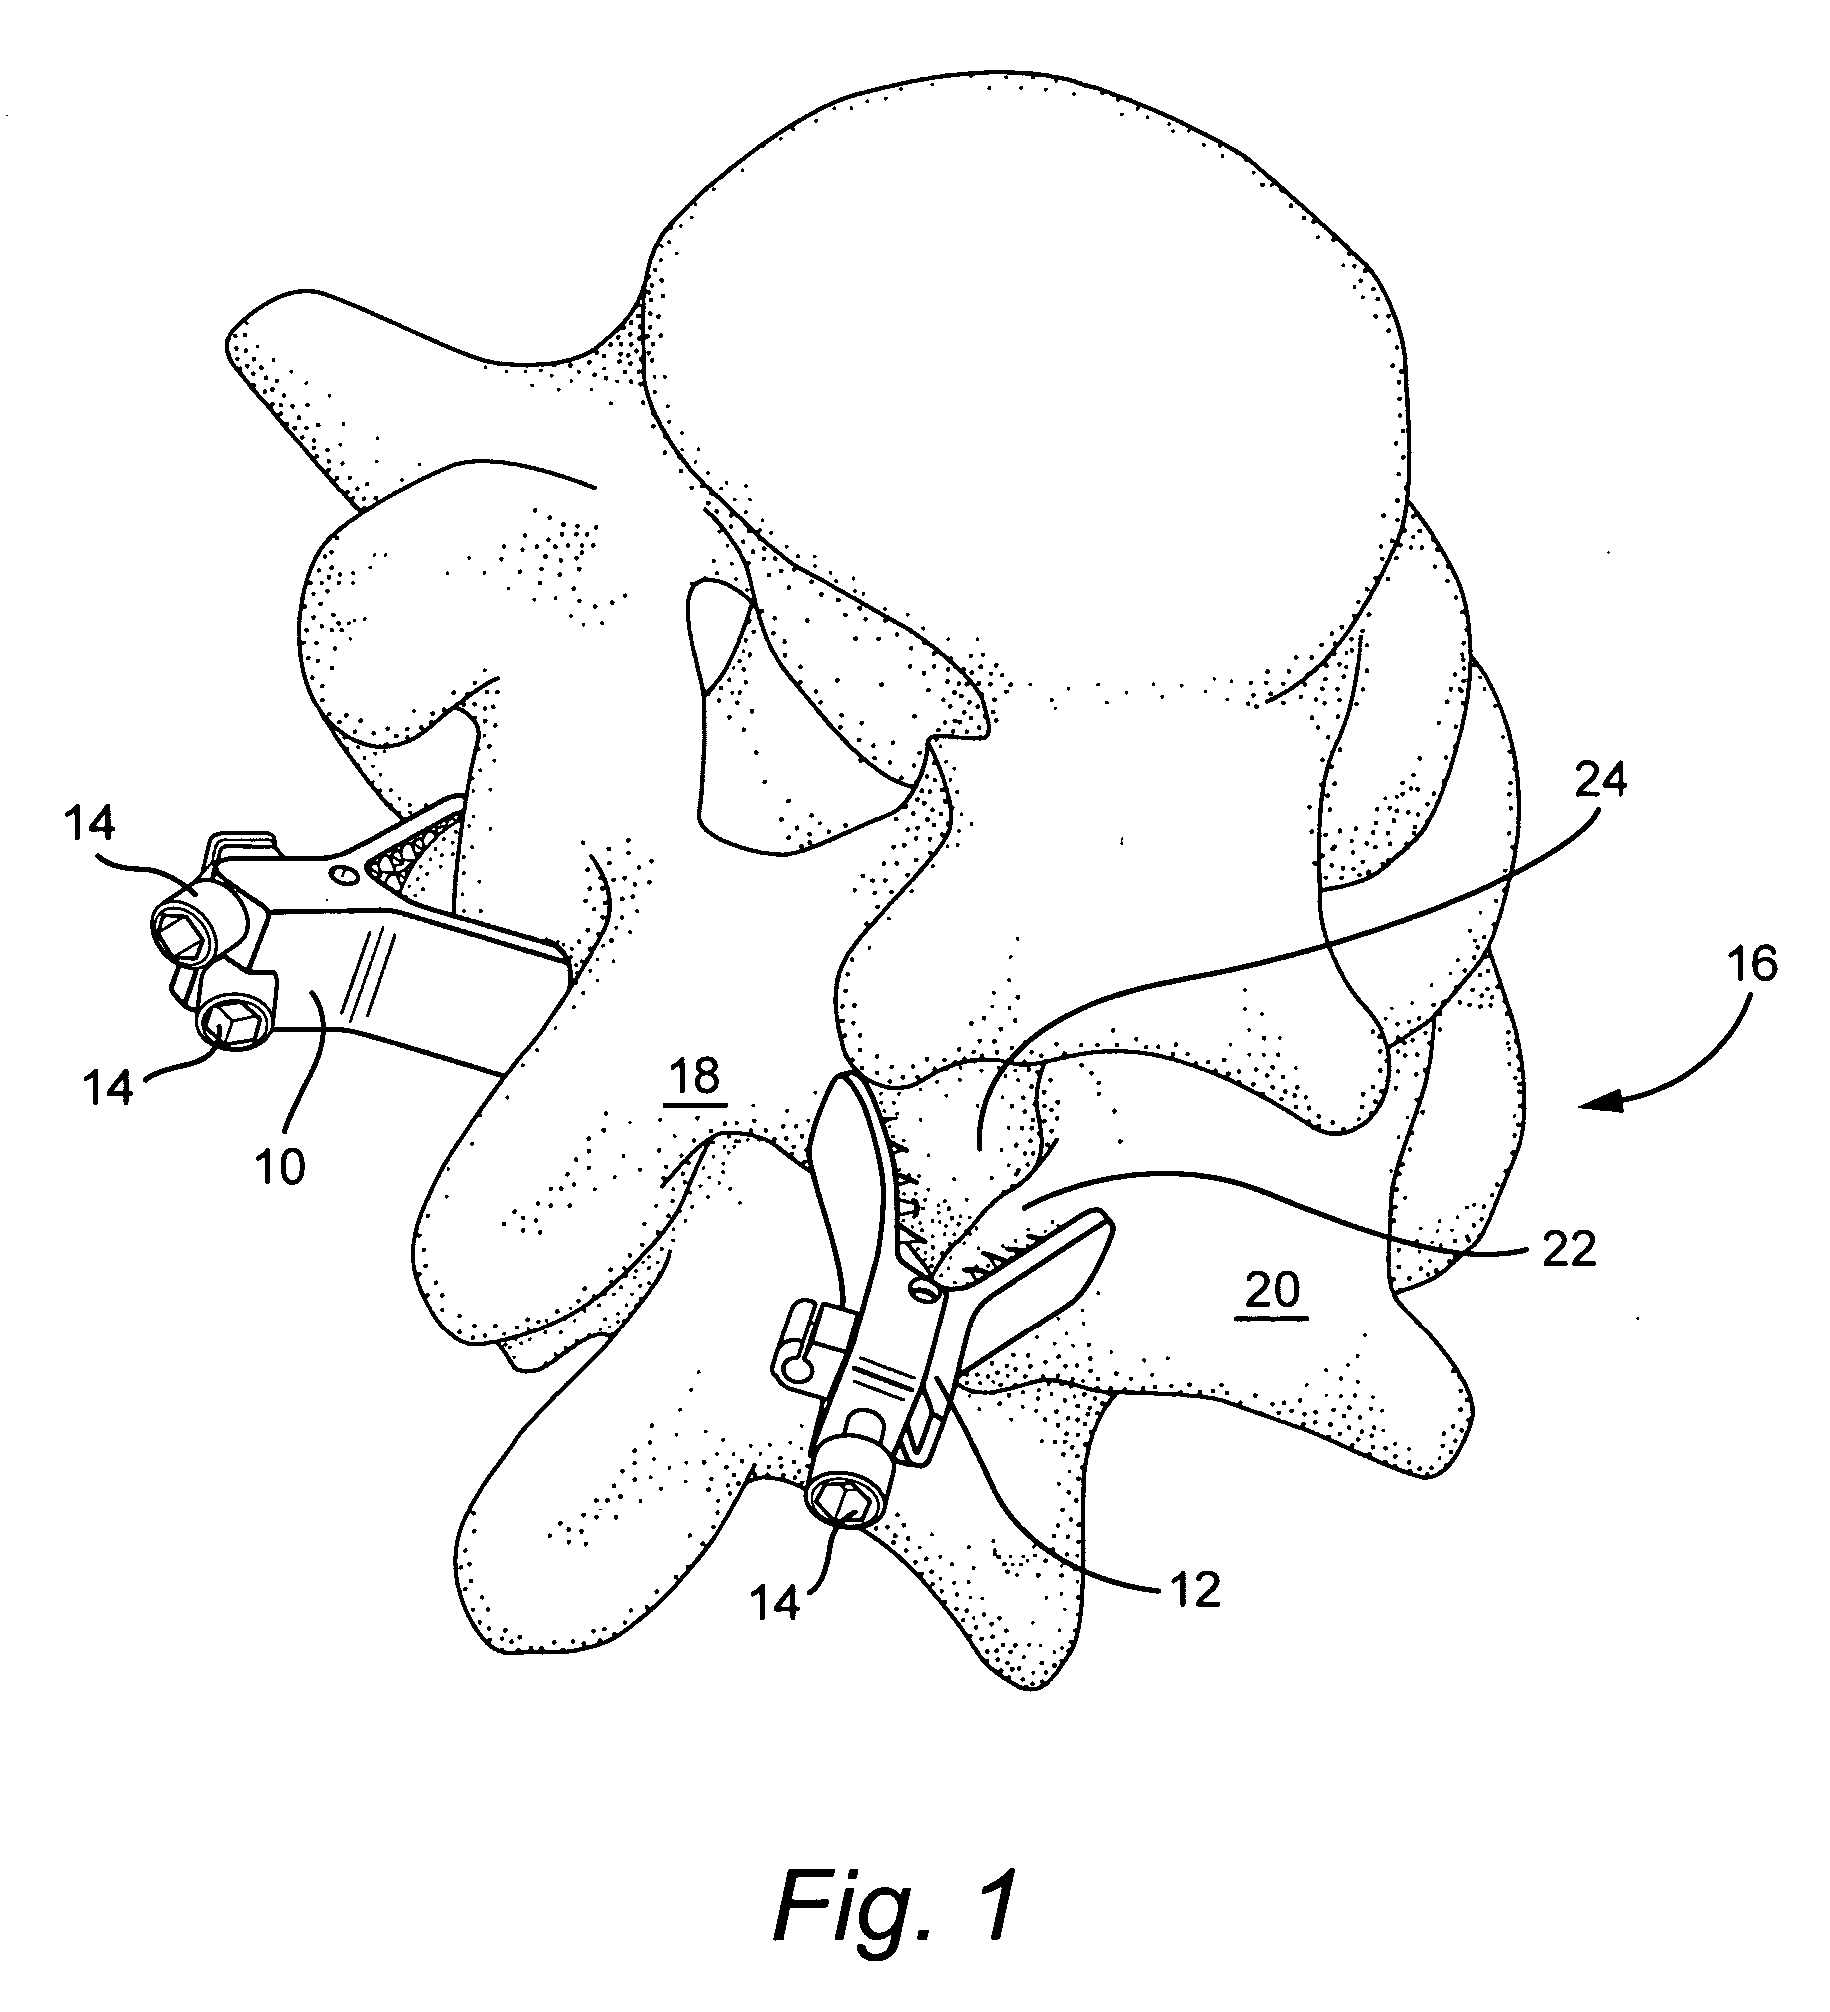 Clamping system and method for fusing vertebral elements in a spine